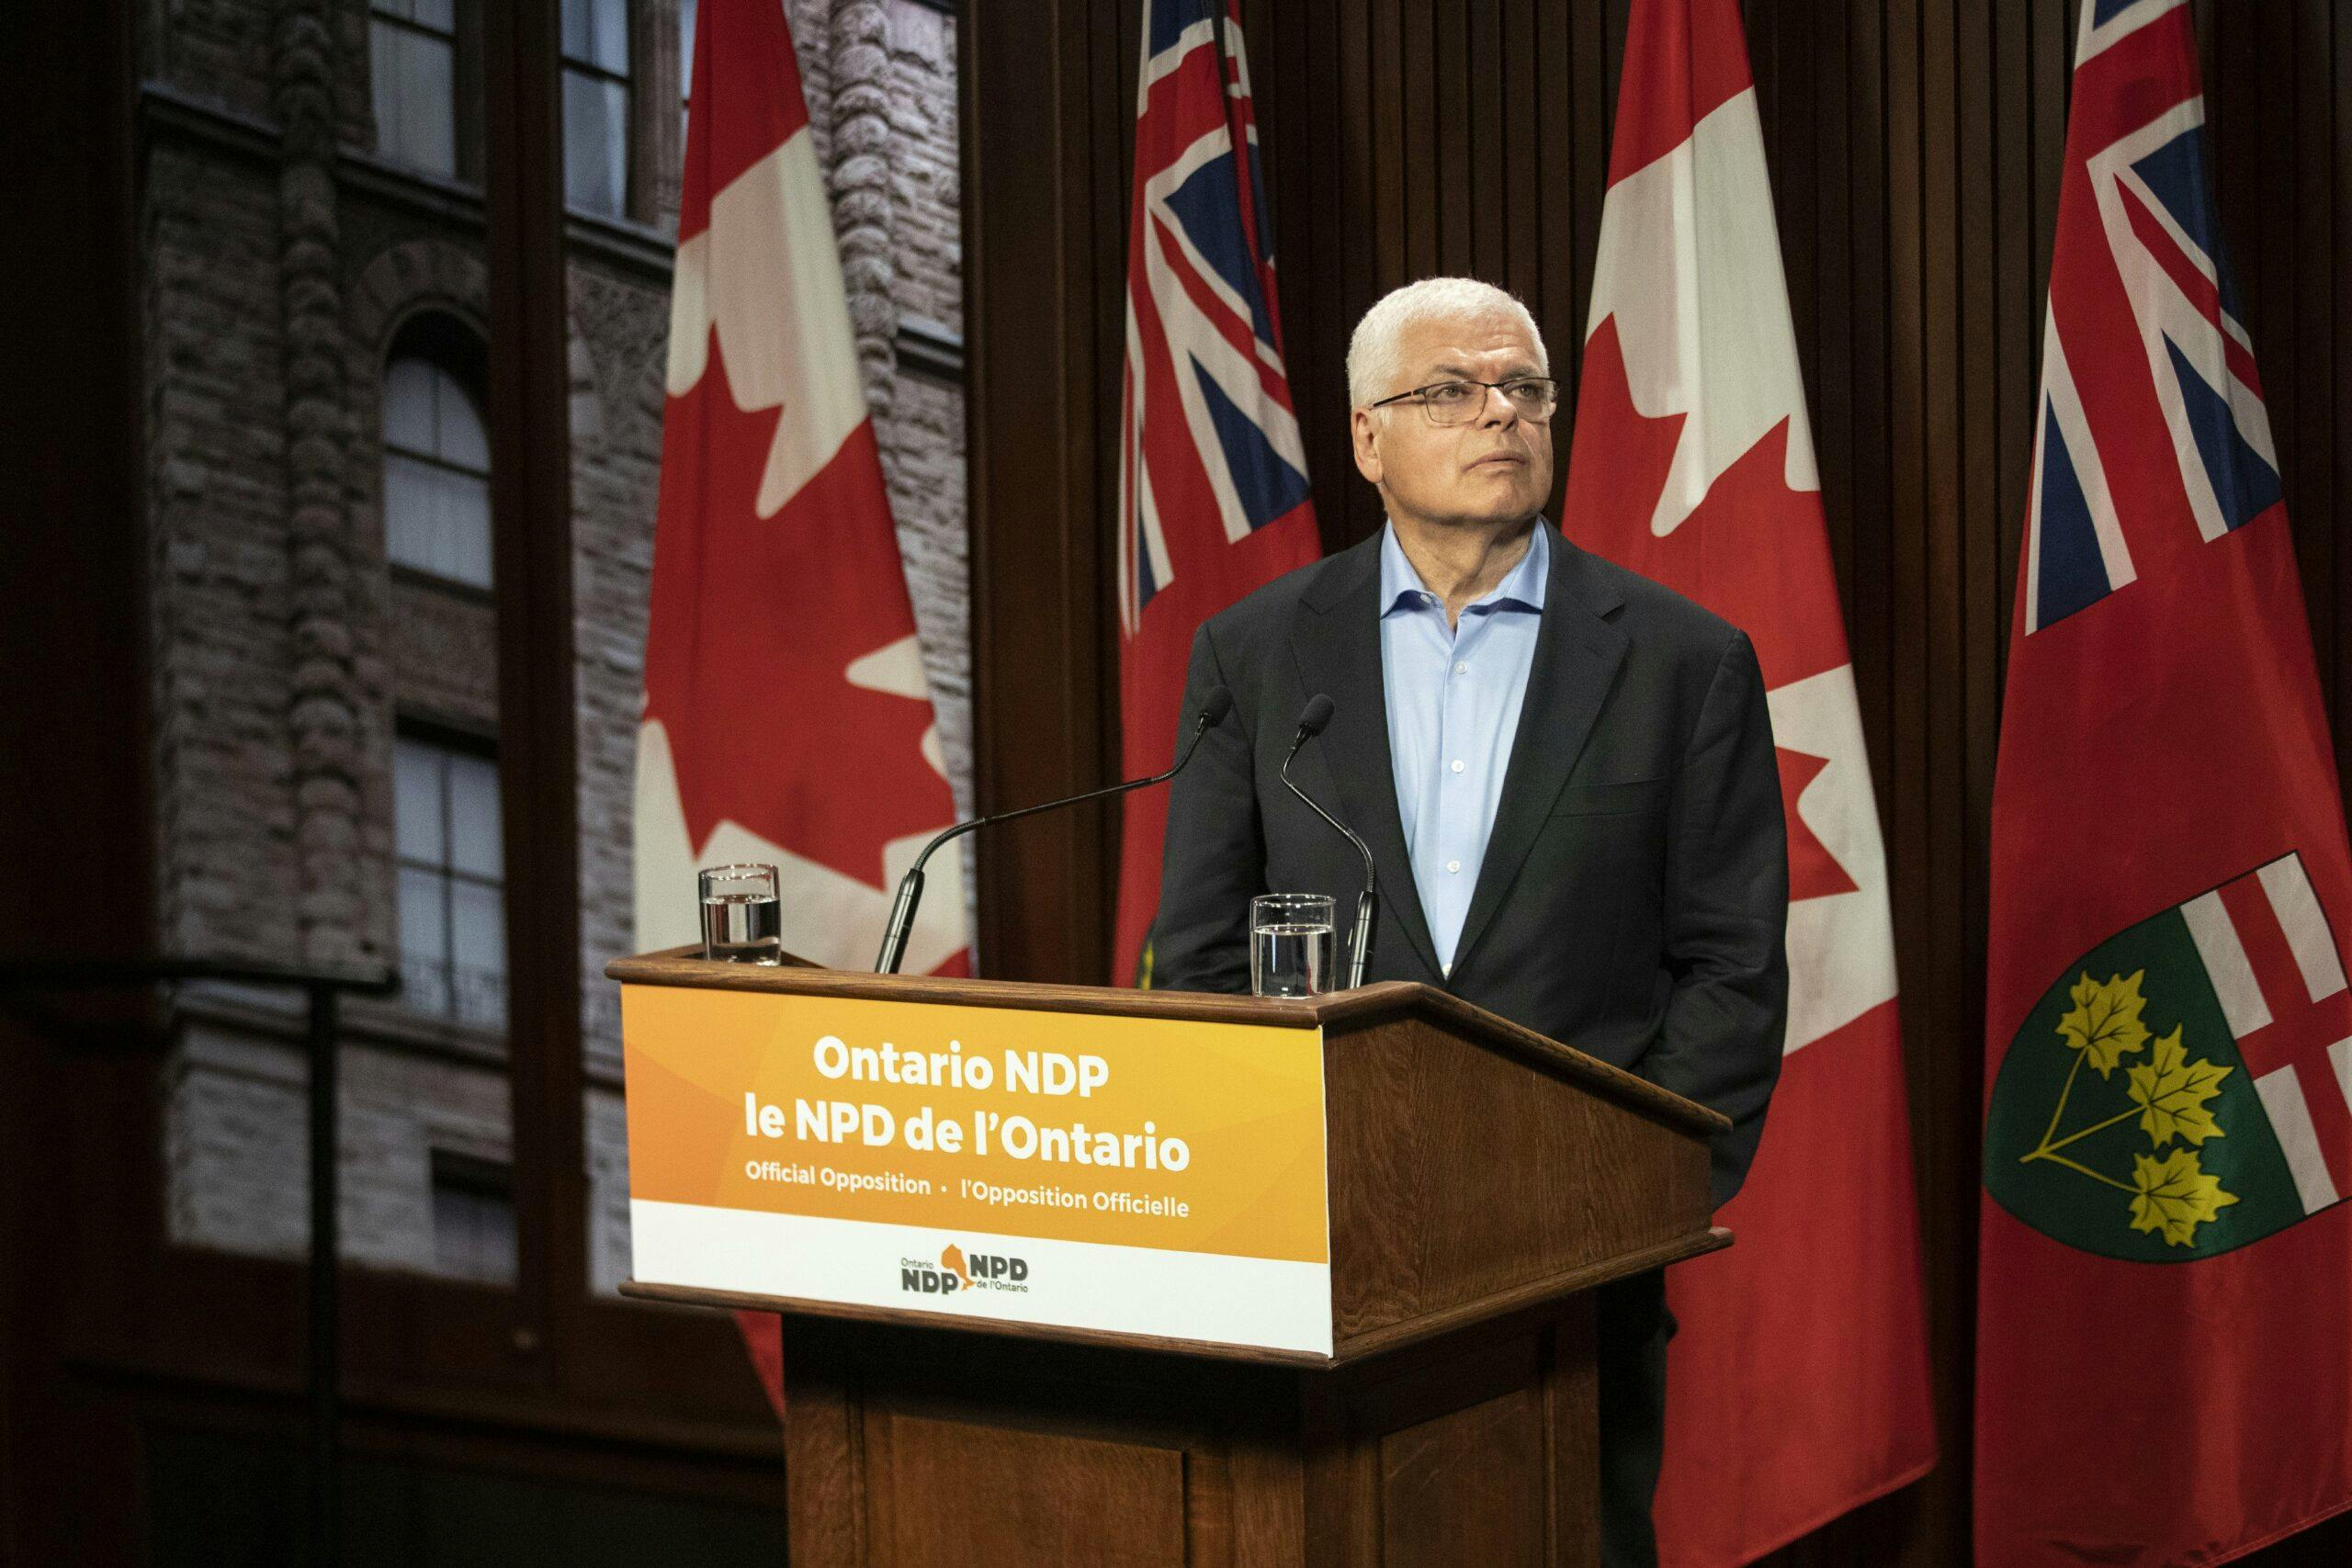 Ontario’s transitioning NDP plants its flags as Ford’s government 2.0 gets moving